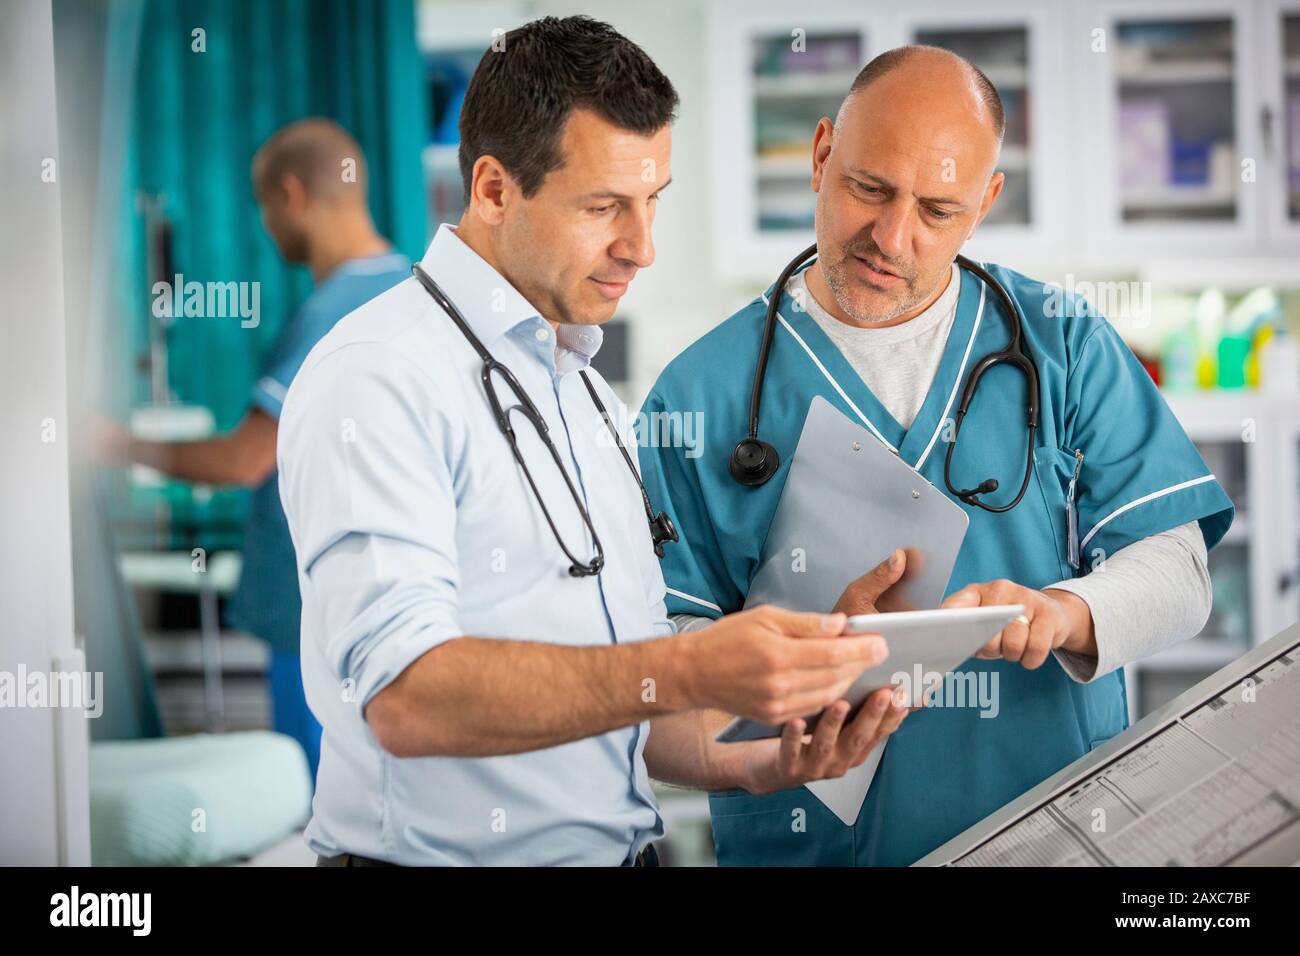 Male doctors using digital tablet in hospital Stock Photo